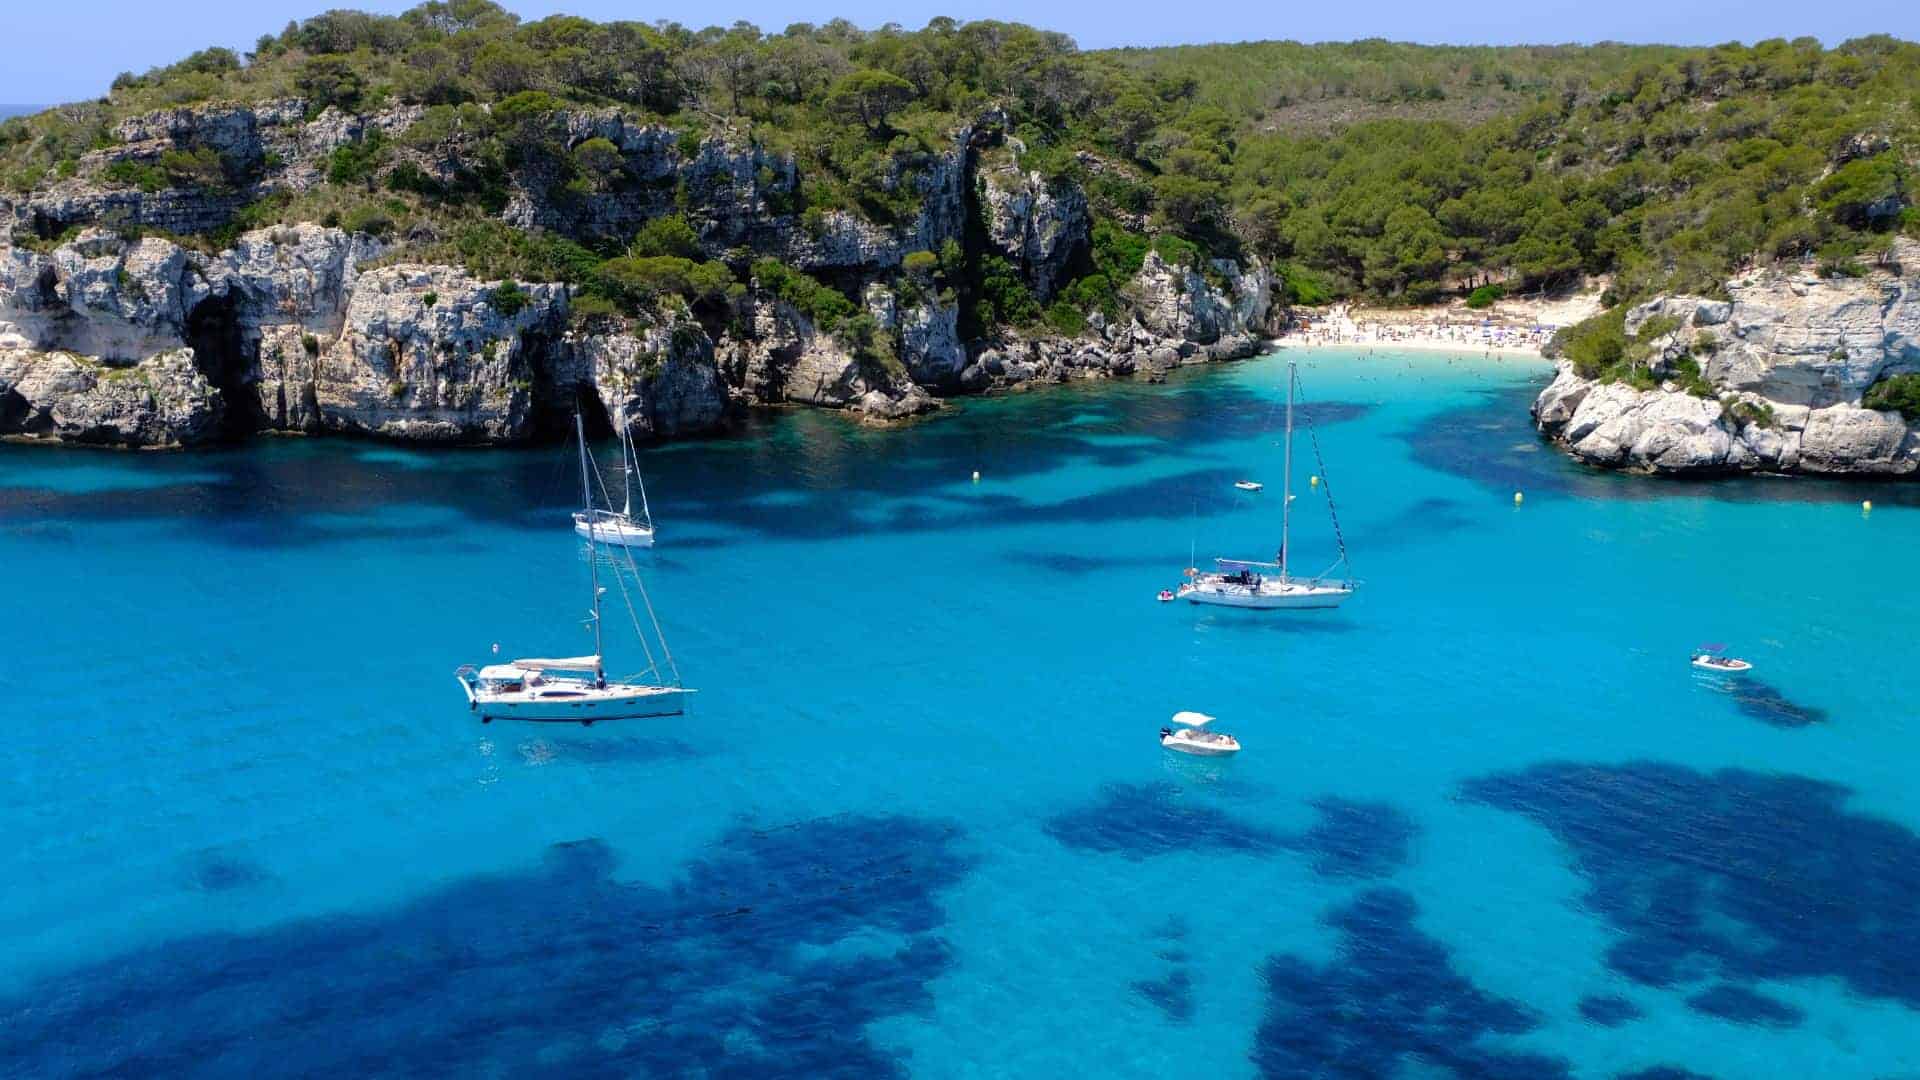 Recommended anchorages in Mallorca by our team